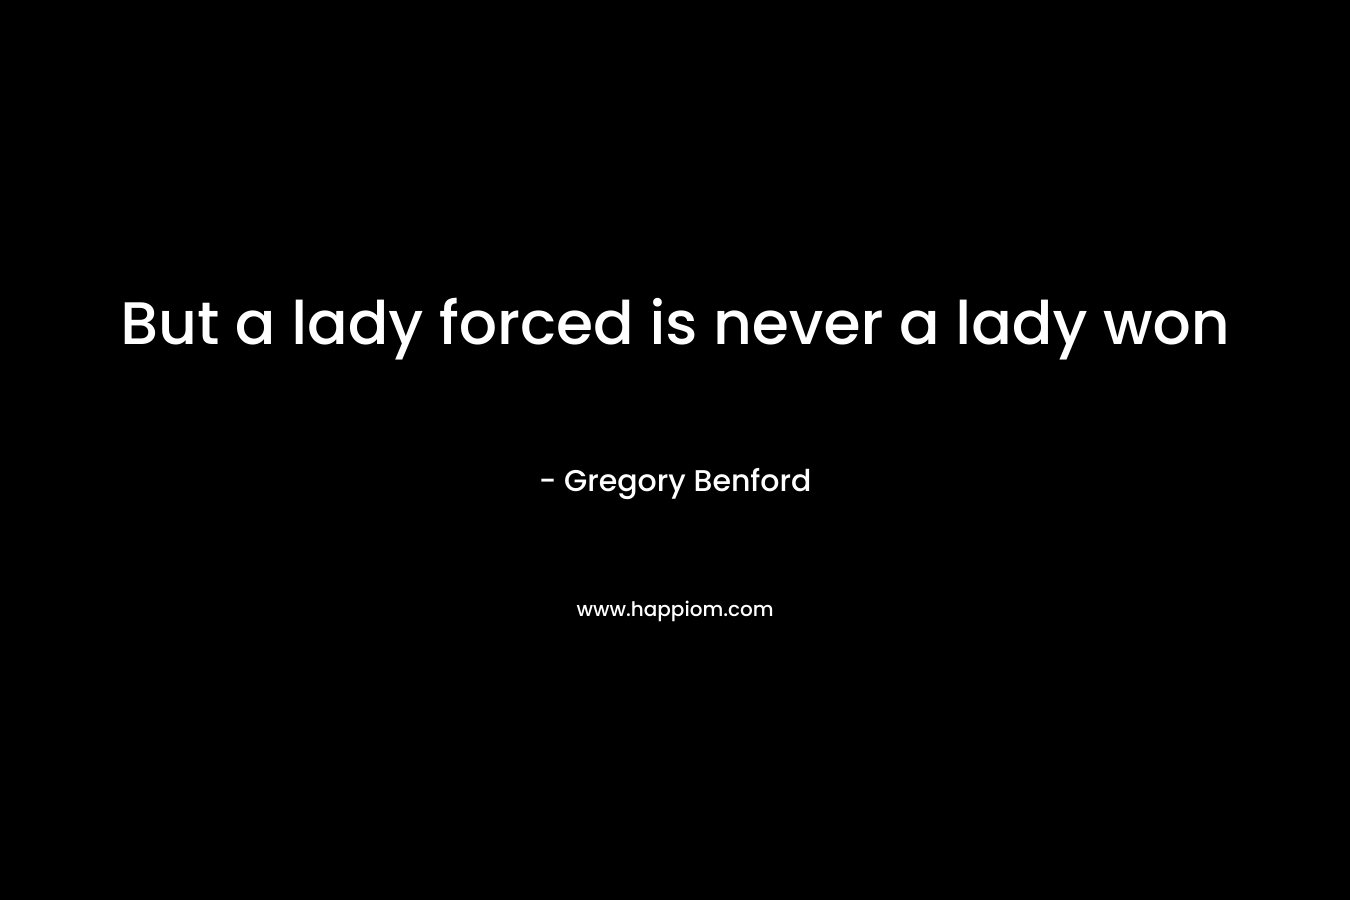 But a lady forced is never a lady won